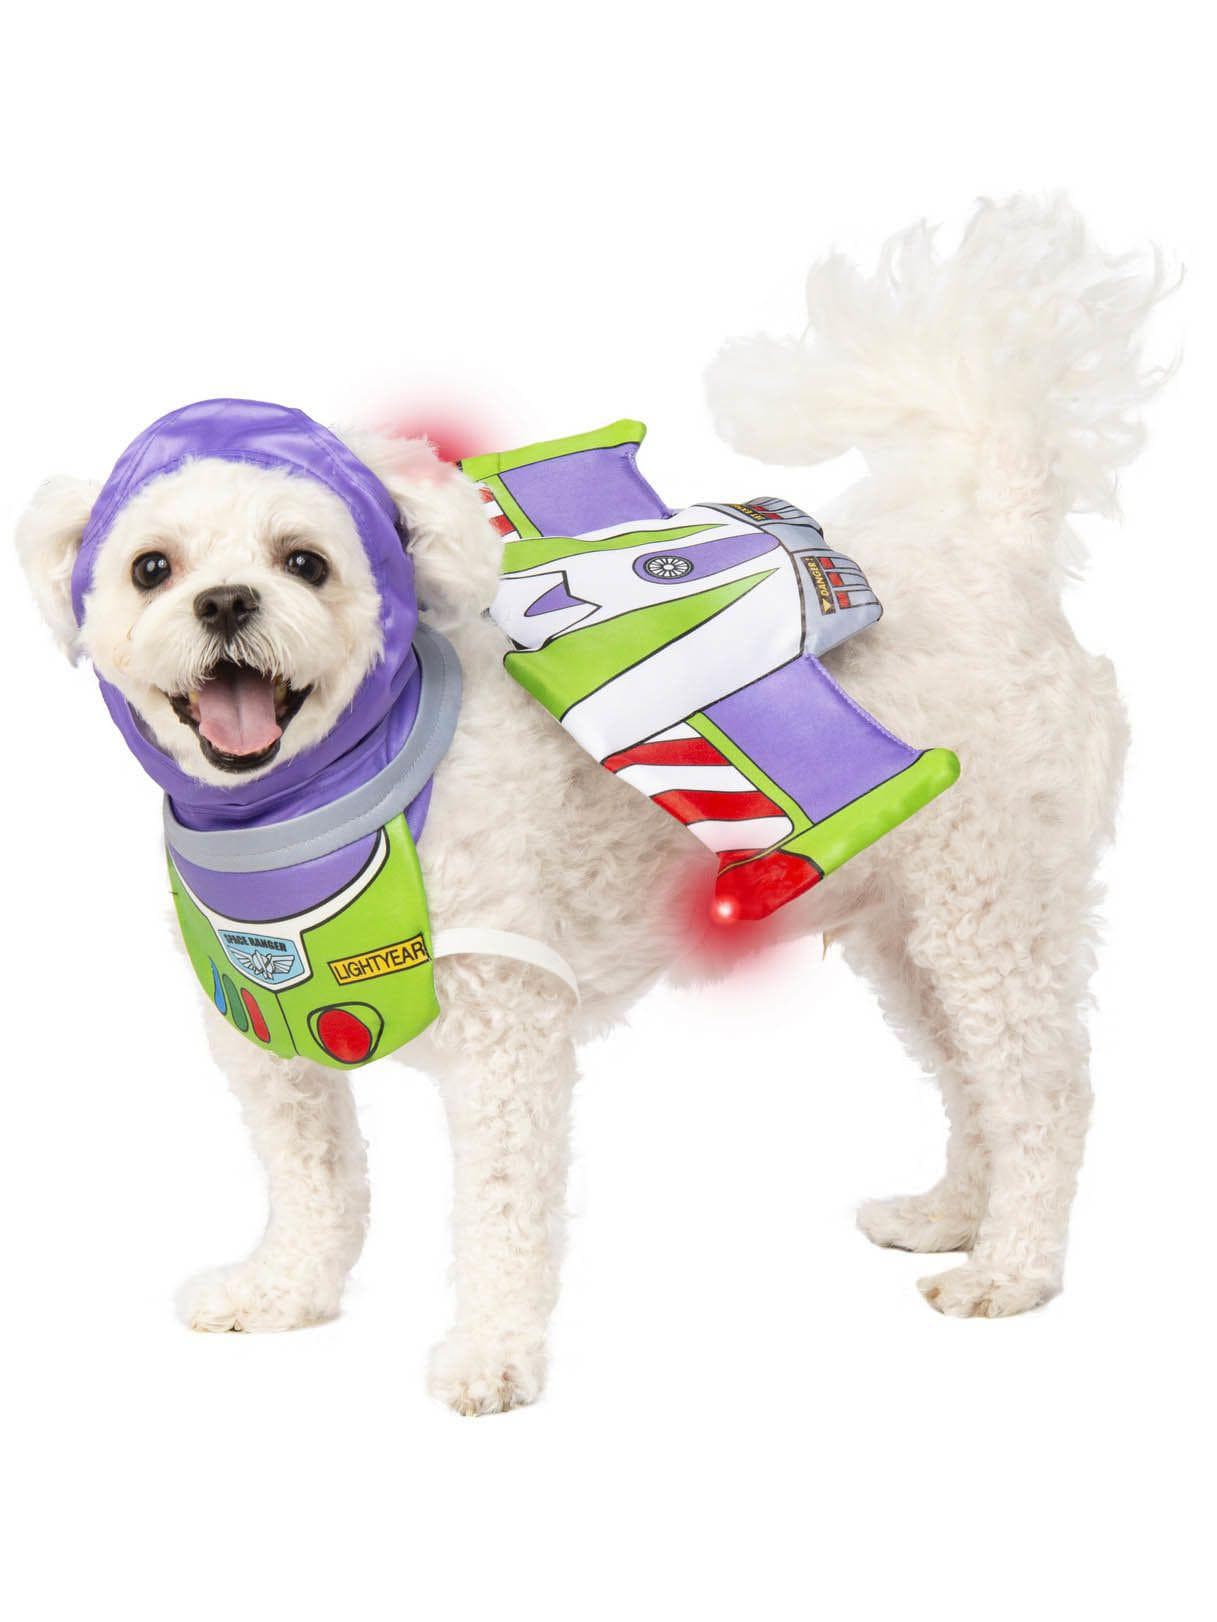 Toy Story Buzz Lightyear Pet Headpiece and Jetpack - costumes.com